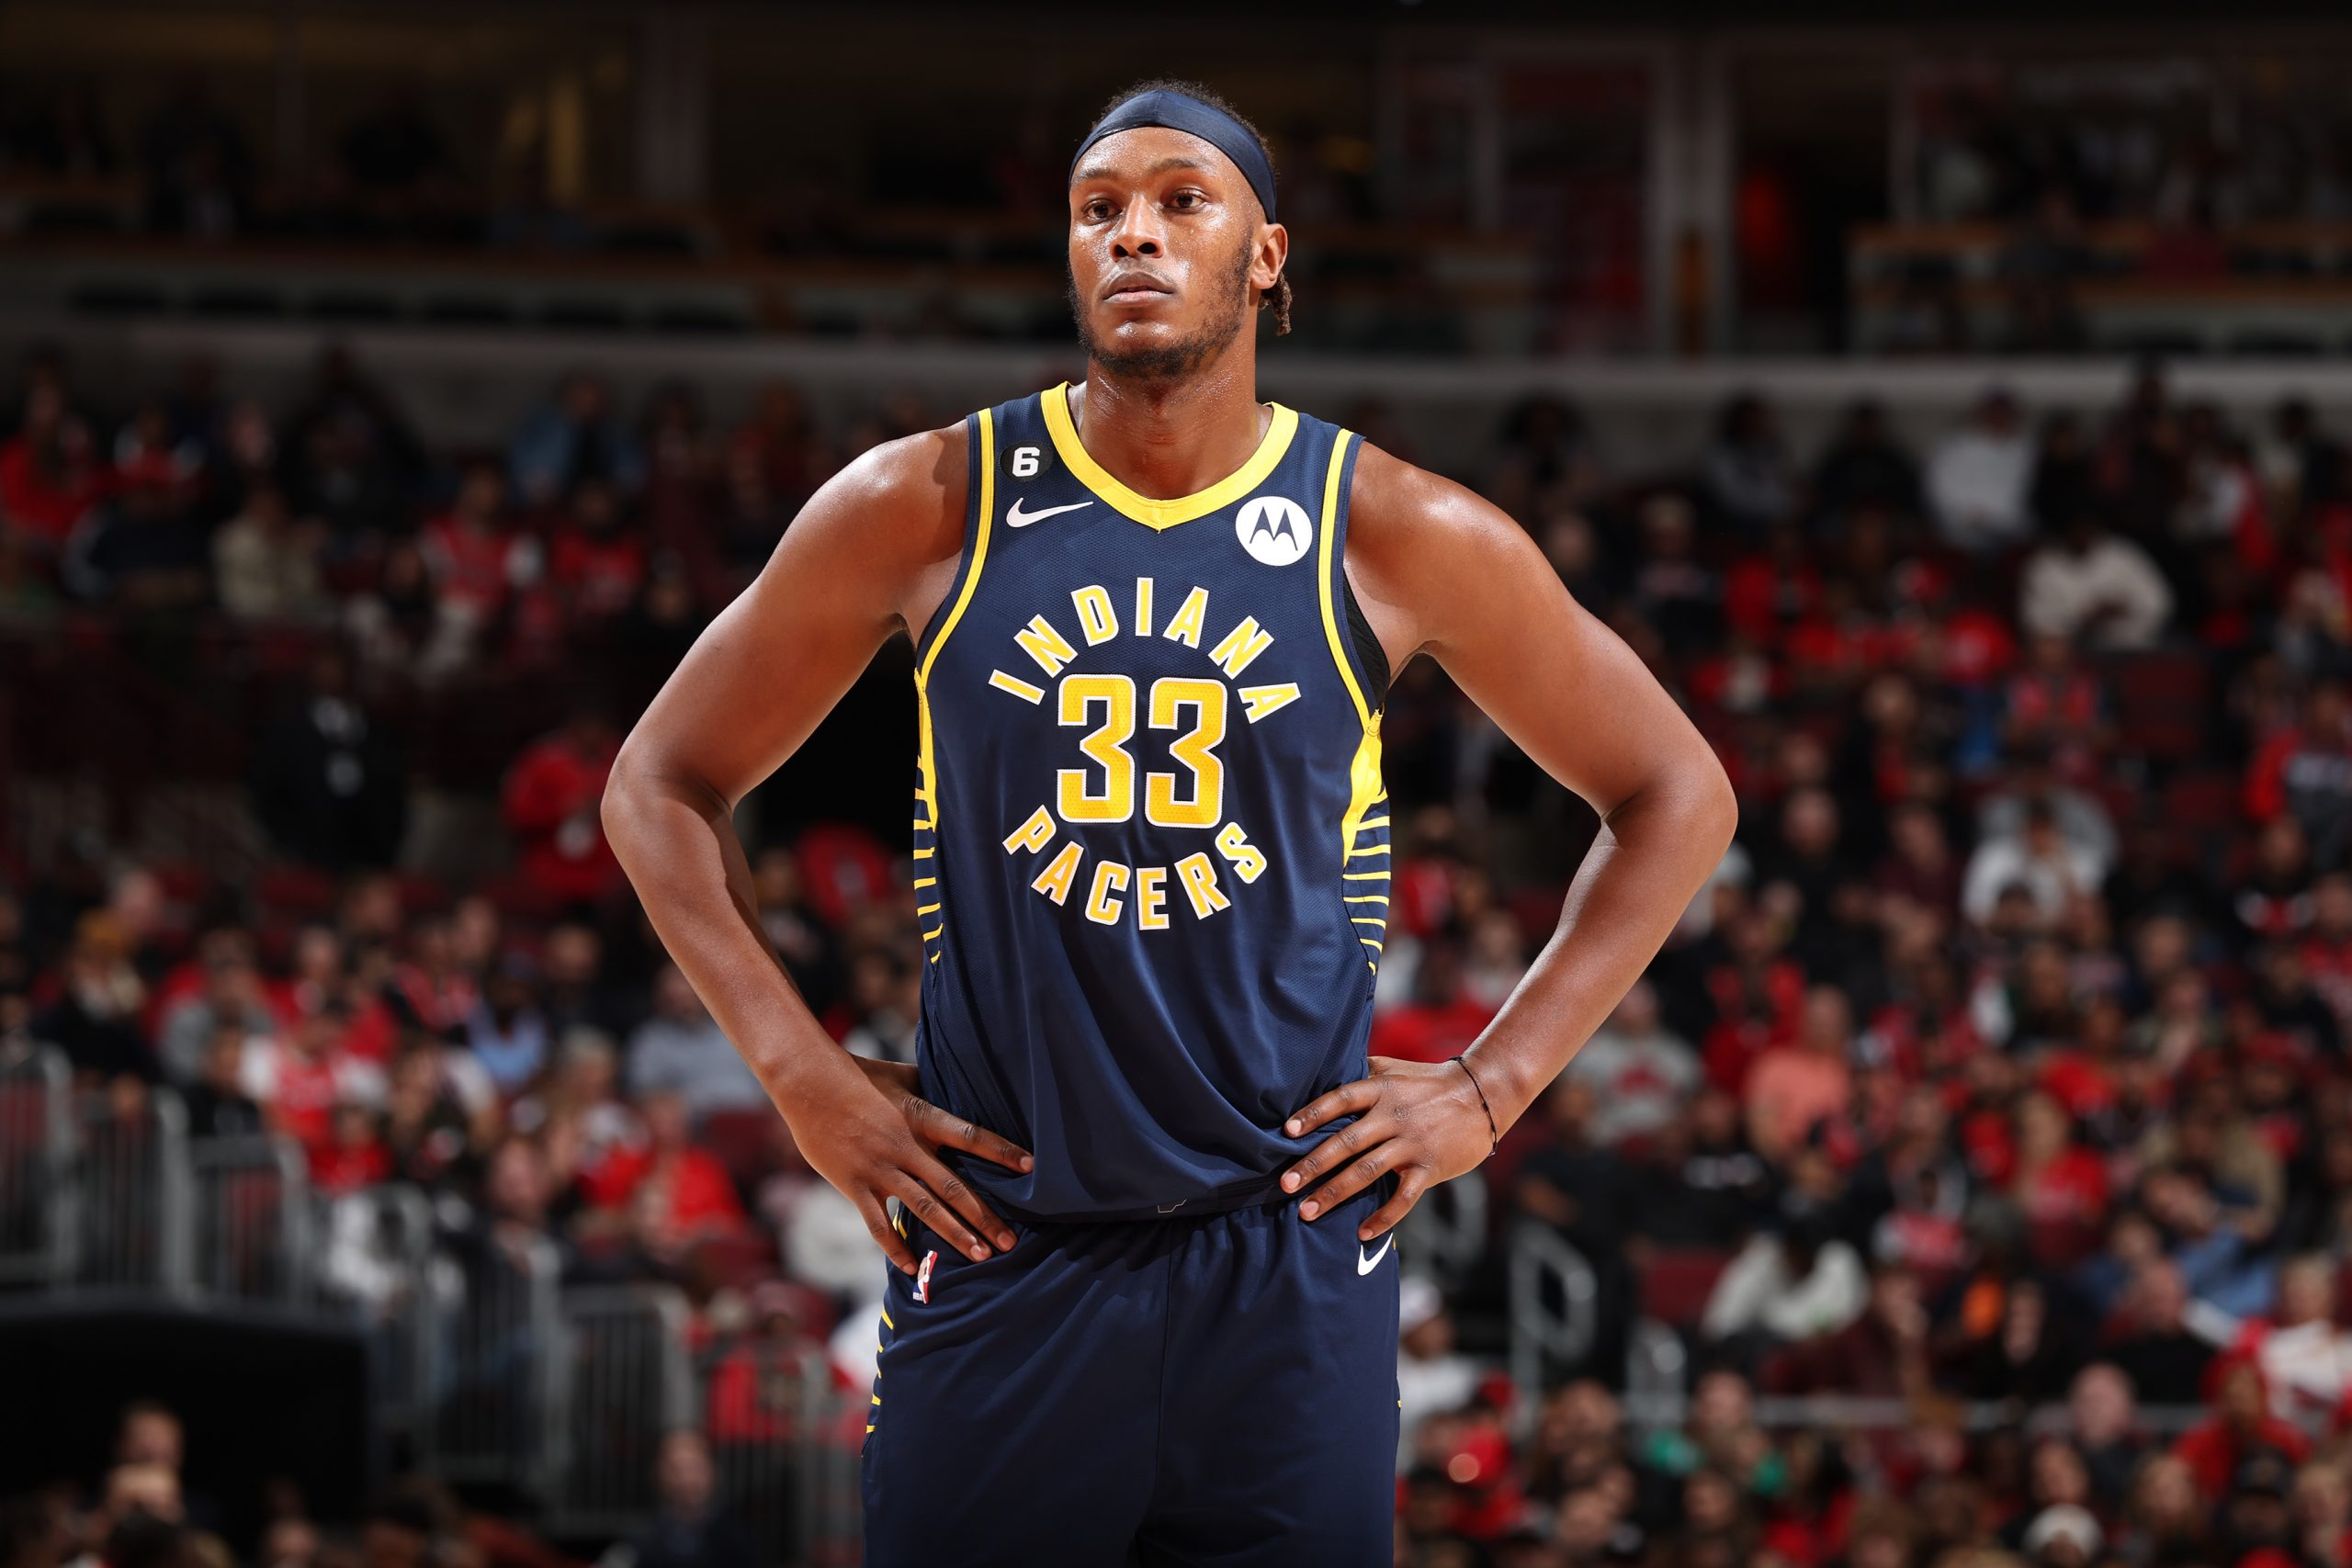 Myles Turner Speaks on What He Could Possibly Bring to Lakers if He’s Traded